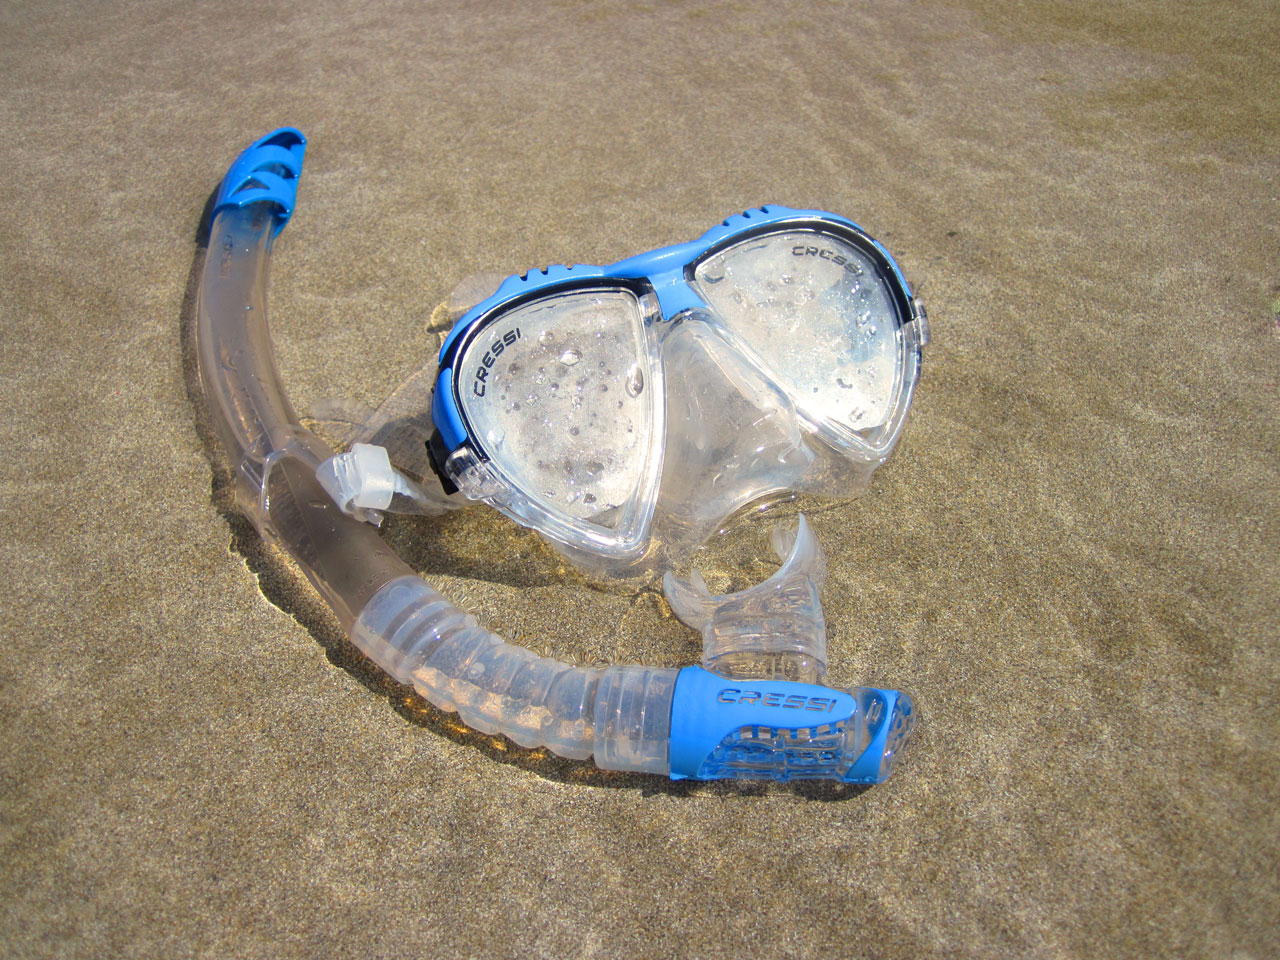 snorkeling mask in sand